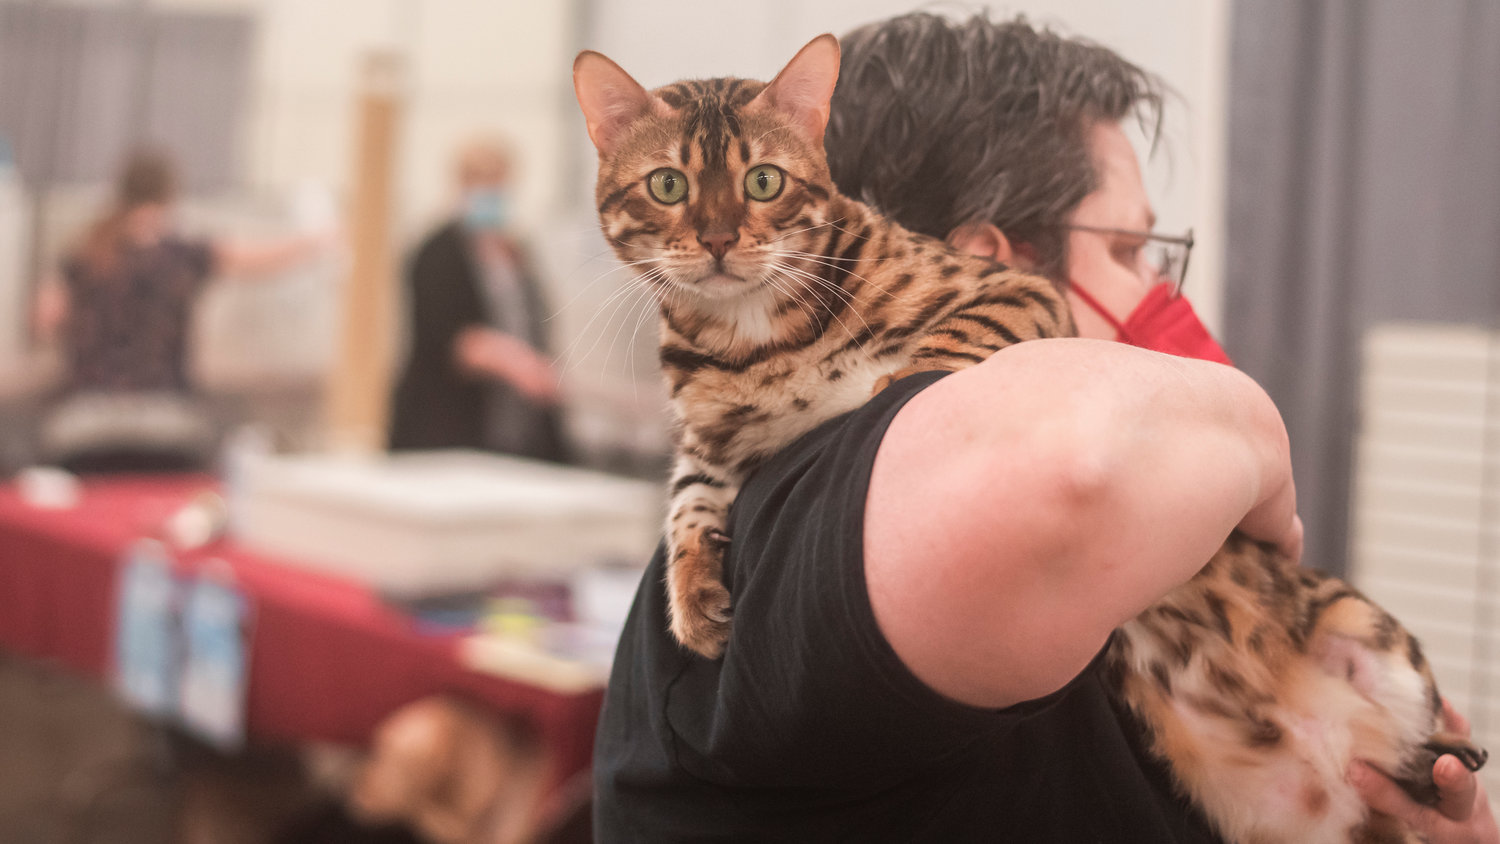 Ginger Thompson carries Sammy, a Bengal cat, on her shoulder through the Blue Pavilion at the Southwest Washington Fairgrounds in Centralia on Sunday.